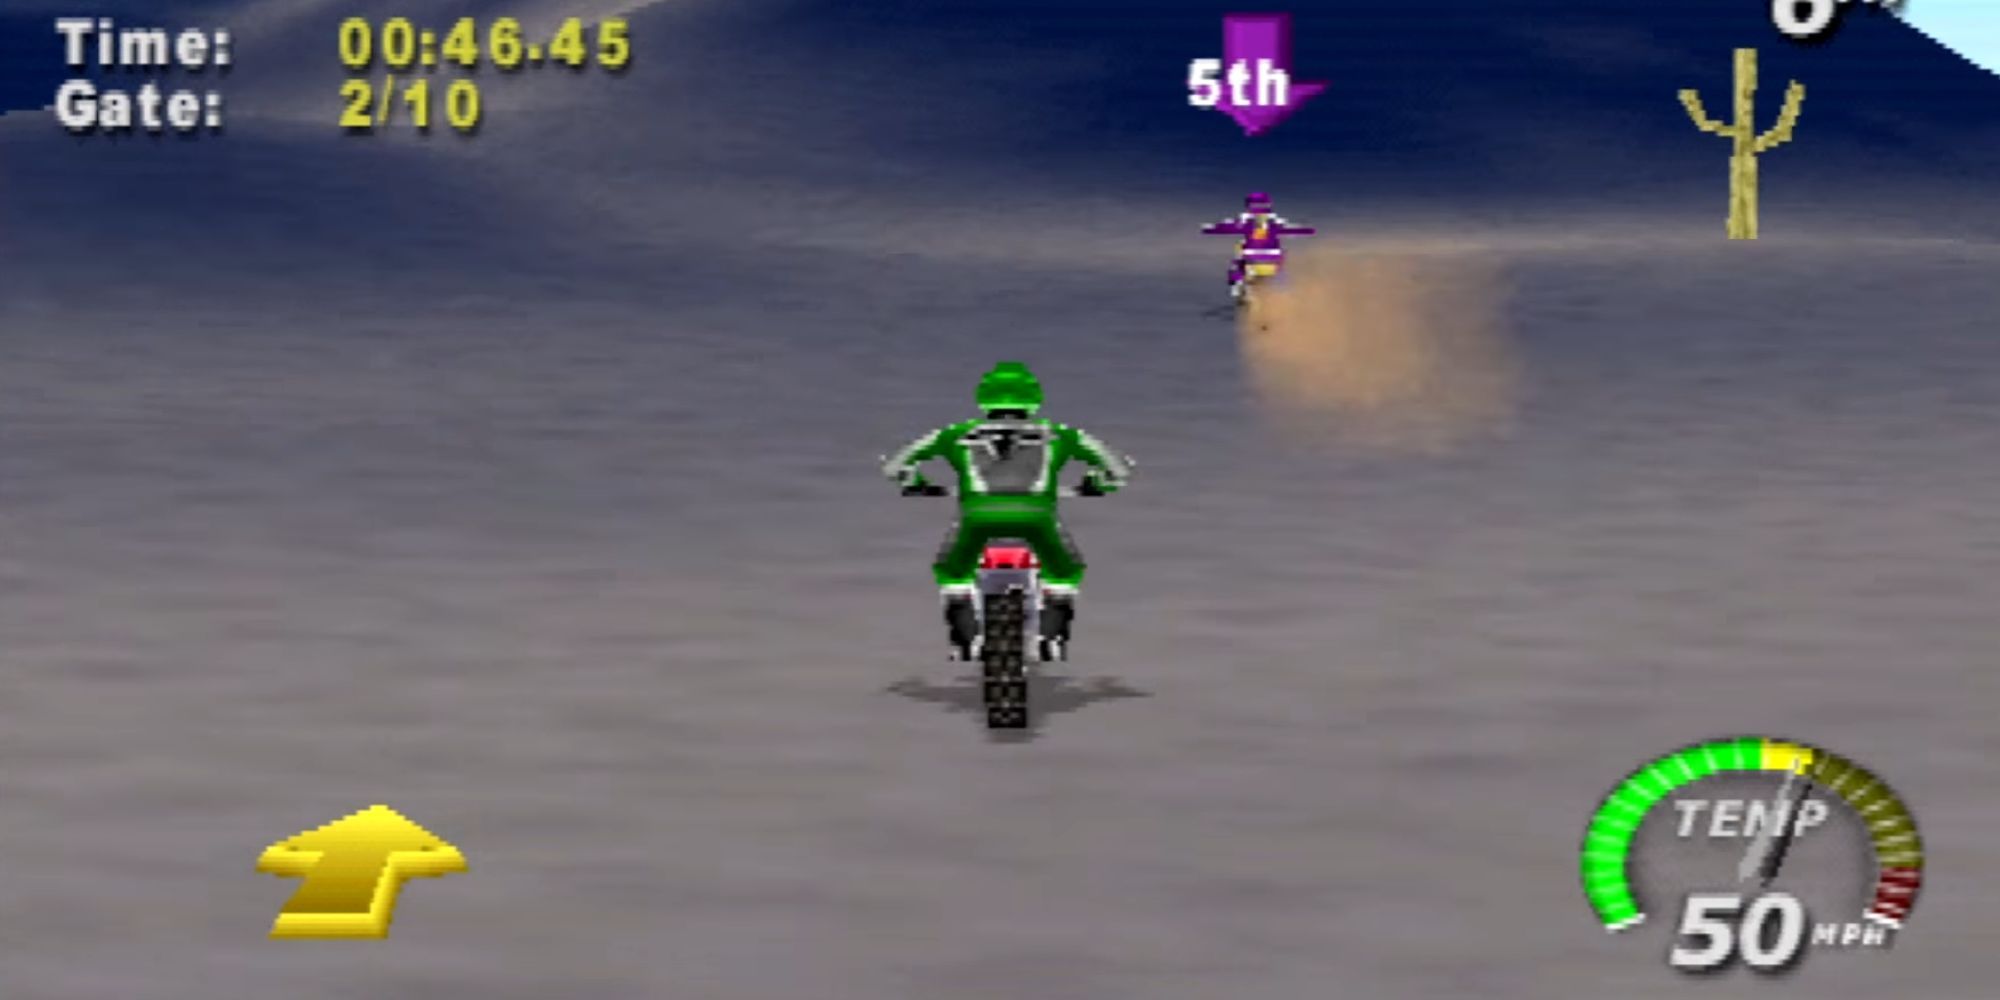 A motorcyclist wears a green jersey while driving through the desert